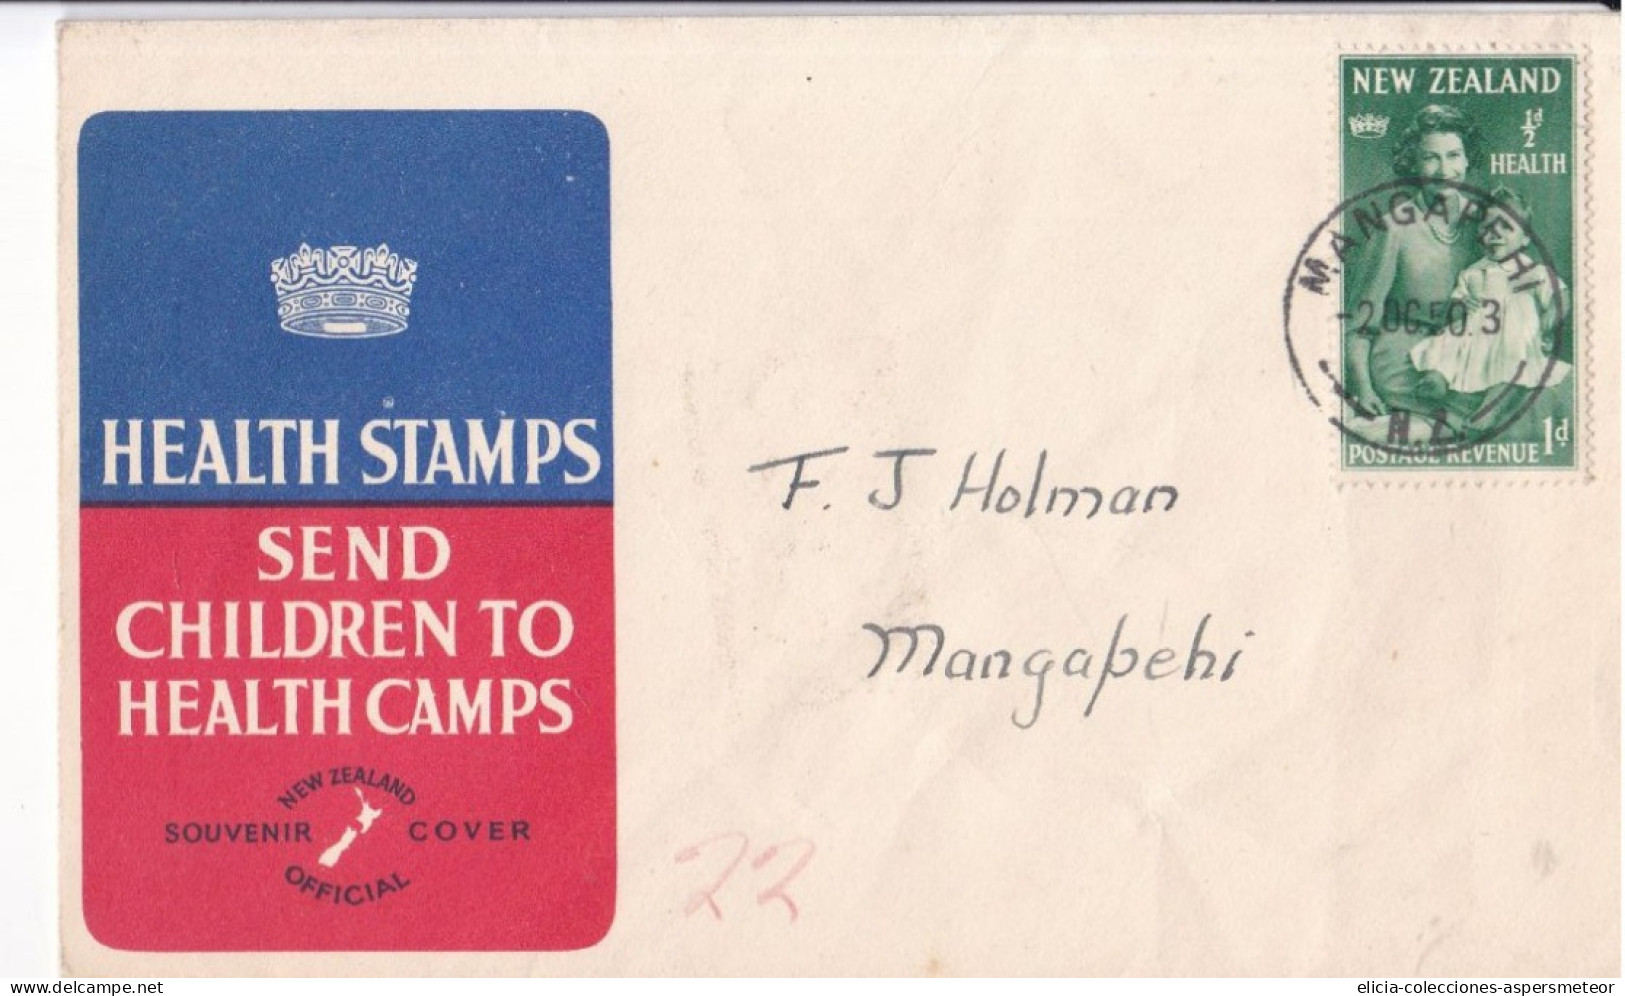 New Zealand - 1950 - FDC - Health  Stamps, Send To Children Health Camps - Caja 30 - FDC